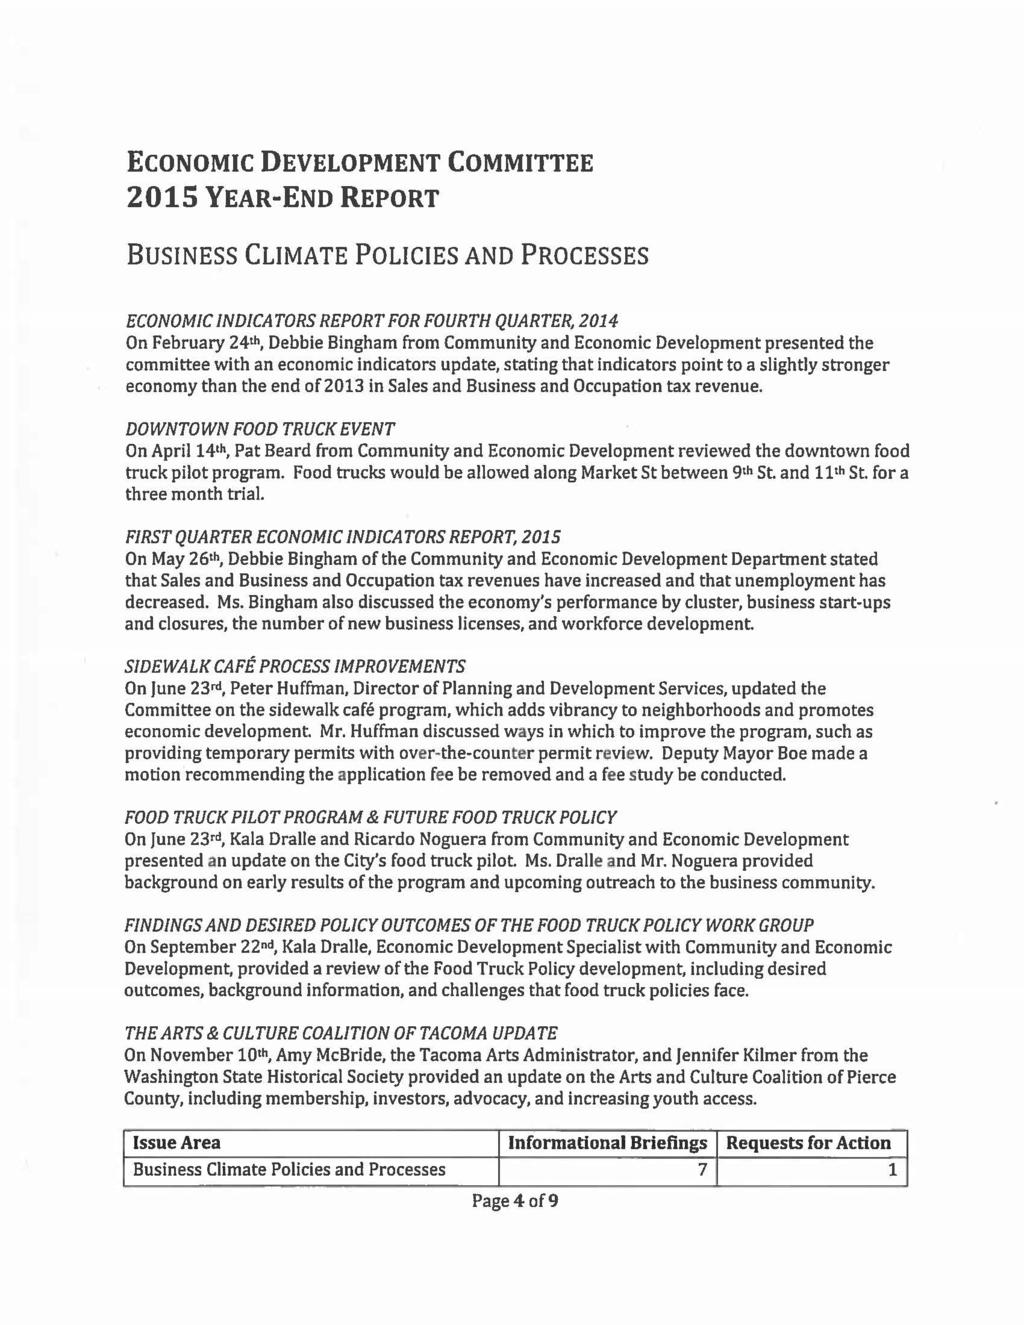 ECONOMIC DEVELOPMENT COMMITTEE 205 YEAR-END REPORT BUSINESS CLIMATE POLICIES AND PROCESSES ECONOMIC INDICATORS REPORT FOR FOURTH QUARTER, 204 On February 24th, Debbie Bingham from Community and